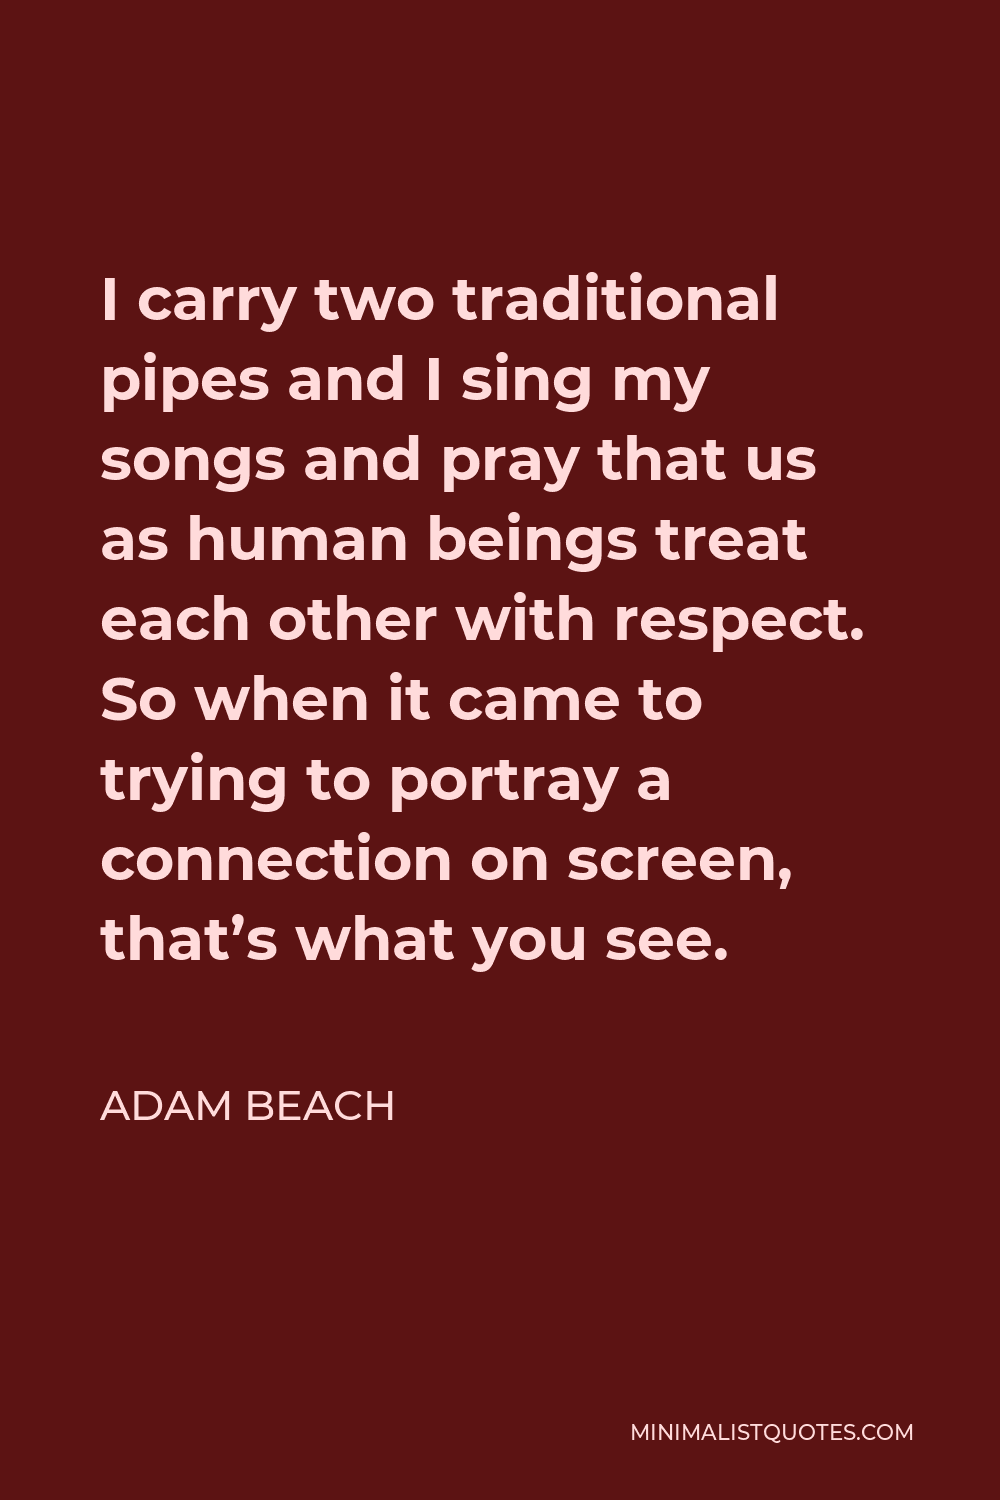 Adam Beach Quote - I carry two traditional pipes and I sing my songs and pray that us as human beings treat each other with respect. So when it came to trying to portray a connection on screen, that’s what you see.